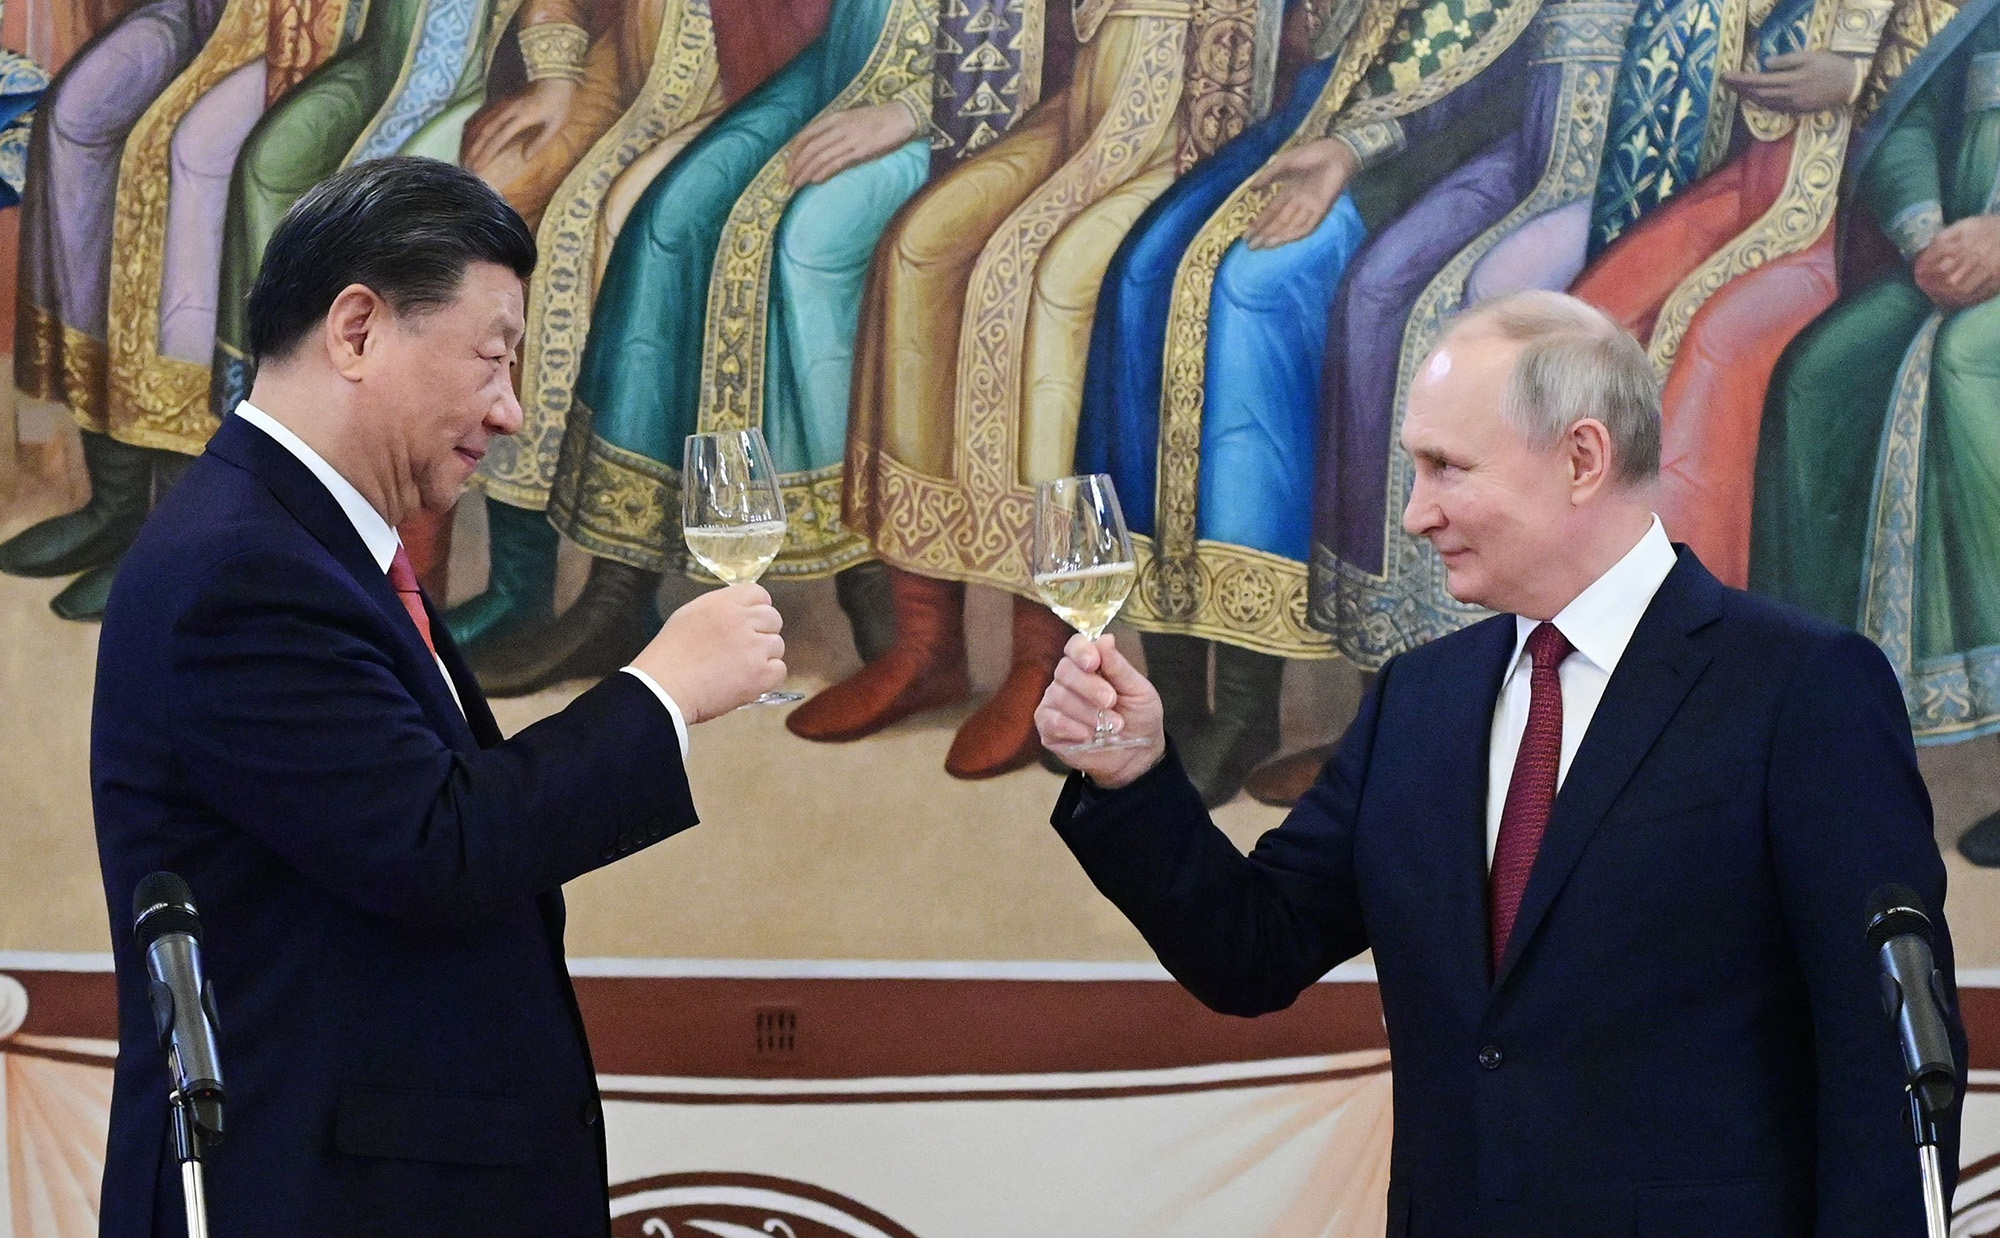 Russian President Vladimir Putin, right, and China's President Xi Jinping make a toast during a reception following their talks at the Kremlin in Moscow, Russia, on March 21.